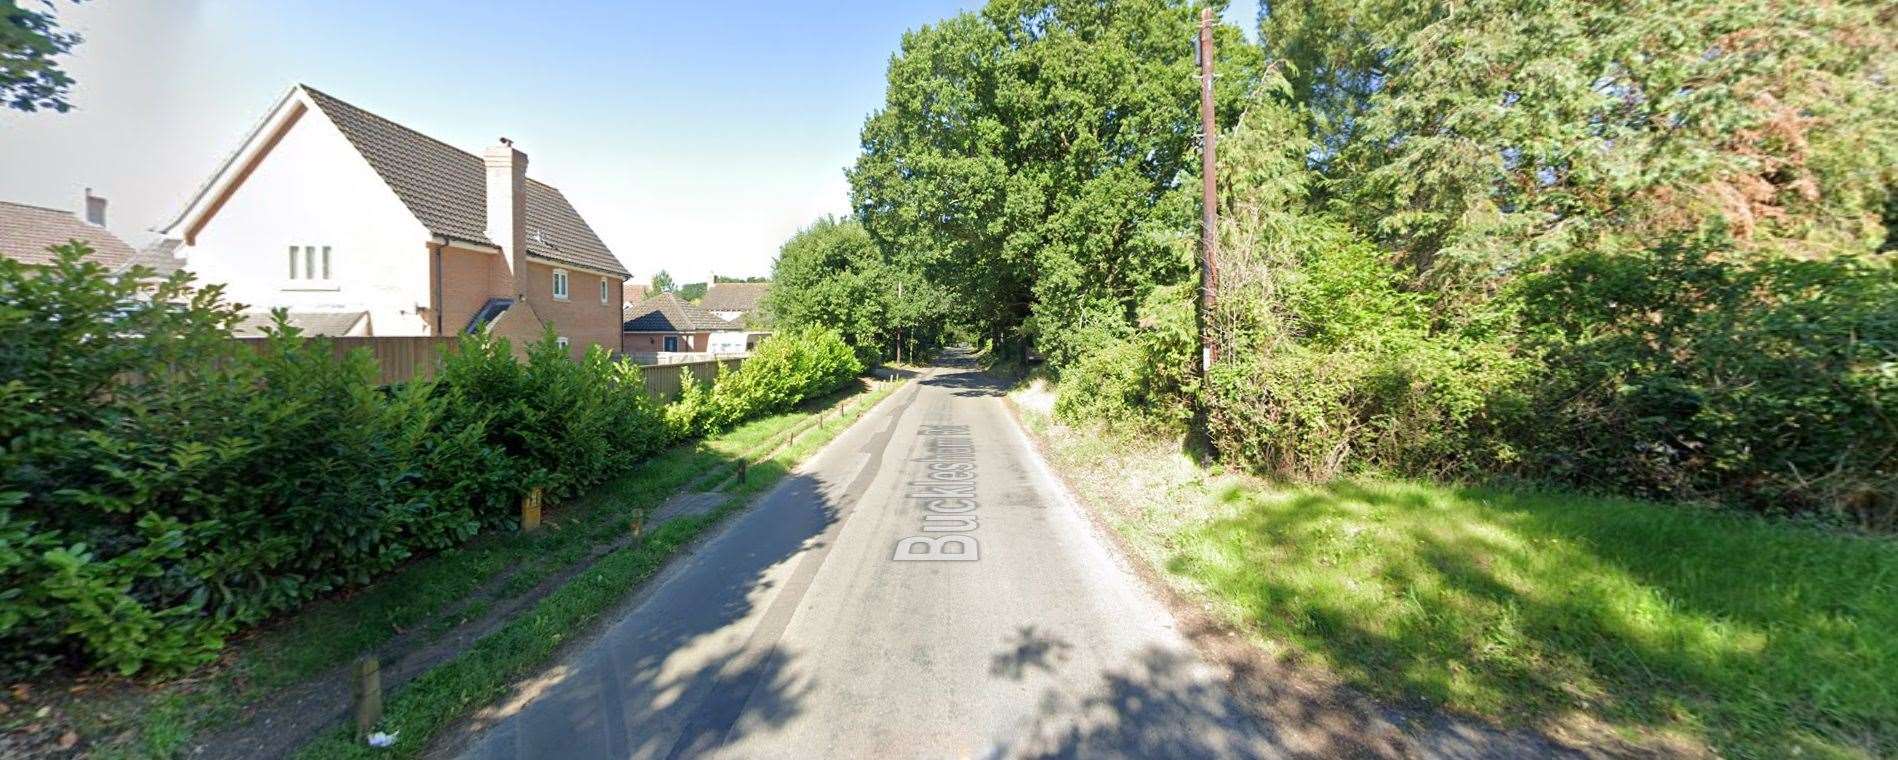 Multiple items were stolen from a shed in Bucklesham Road, Ipswich. Picture: Google Maps